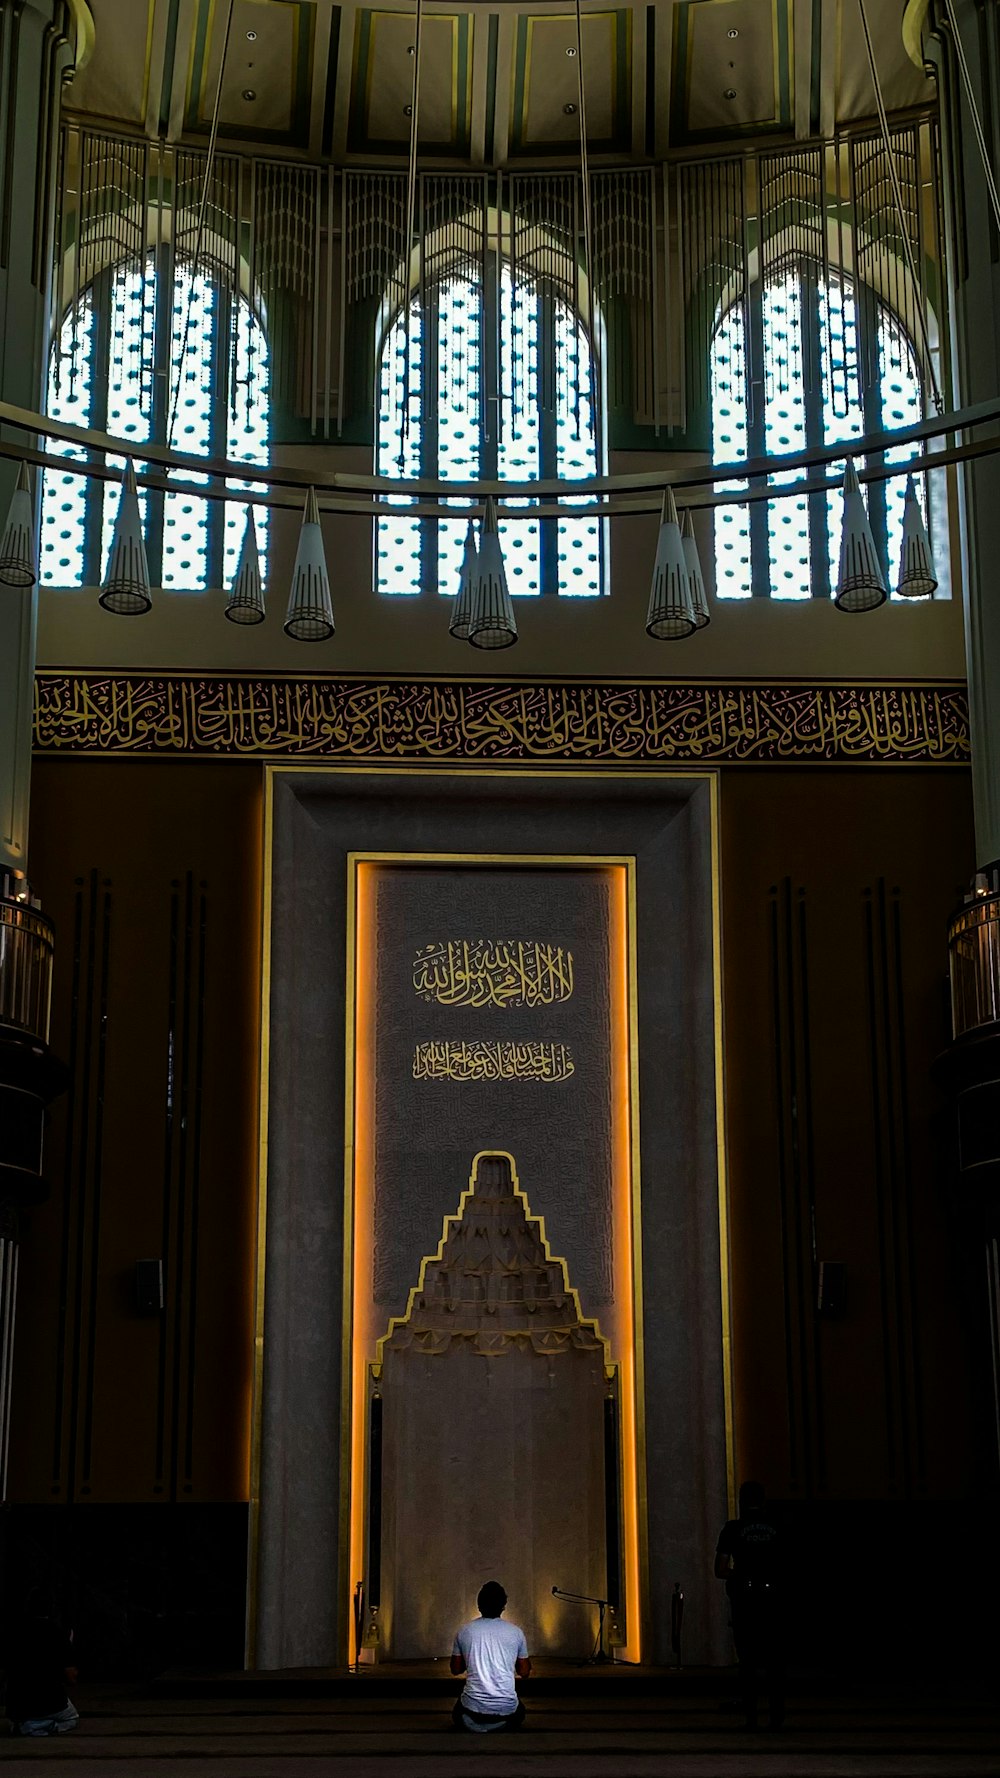 a person sitting in a room with a large gold door and chandelier